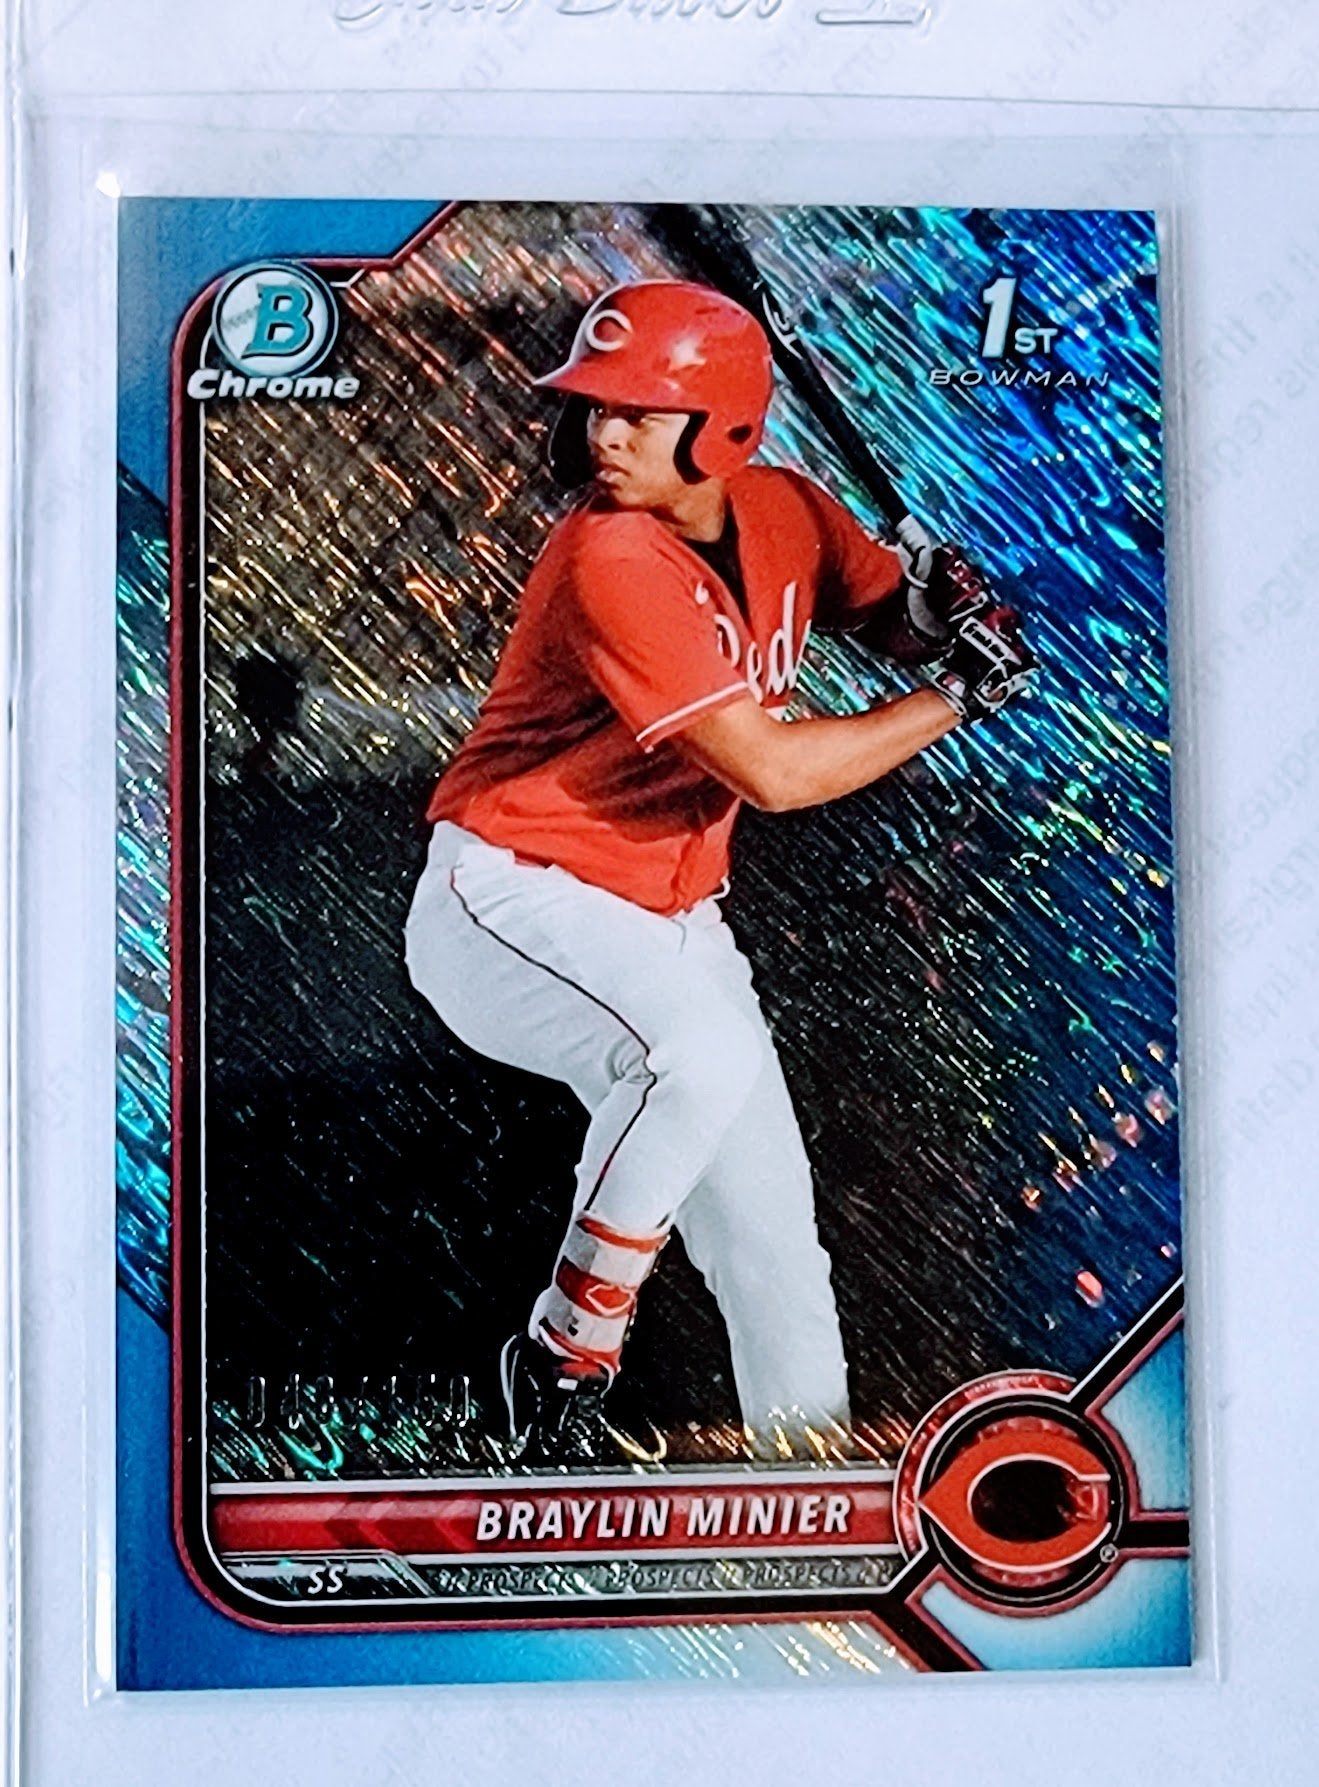 2022 Bowman Chrome Braylin Minier 1st on Bowman Prospect #'d/150 Blue Shimmer Refractor Baseball Trading Card GRB1 simple Xclusive Collectibles   